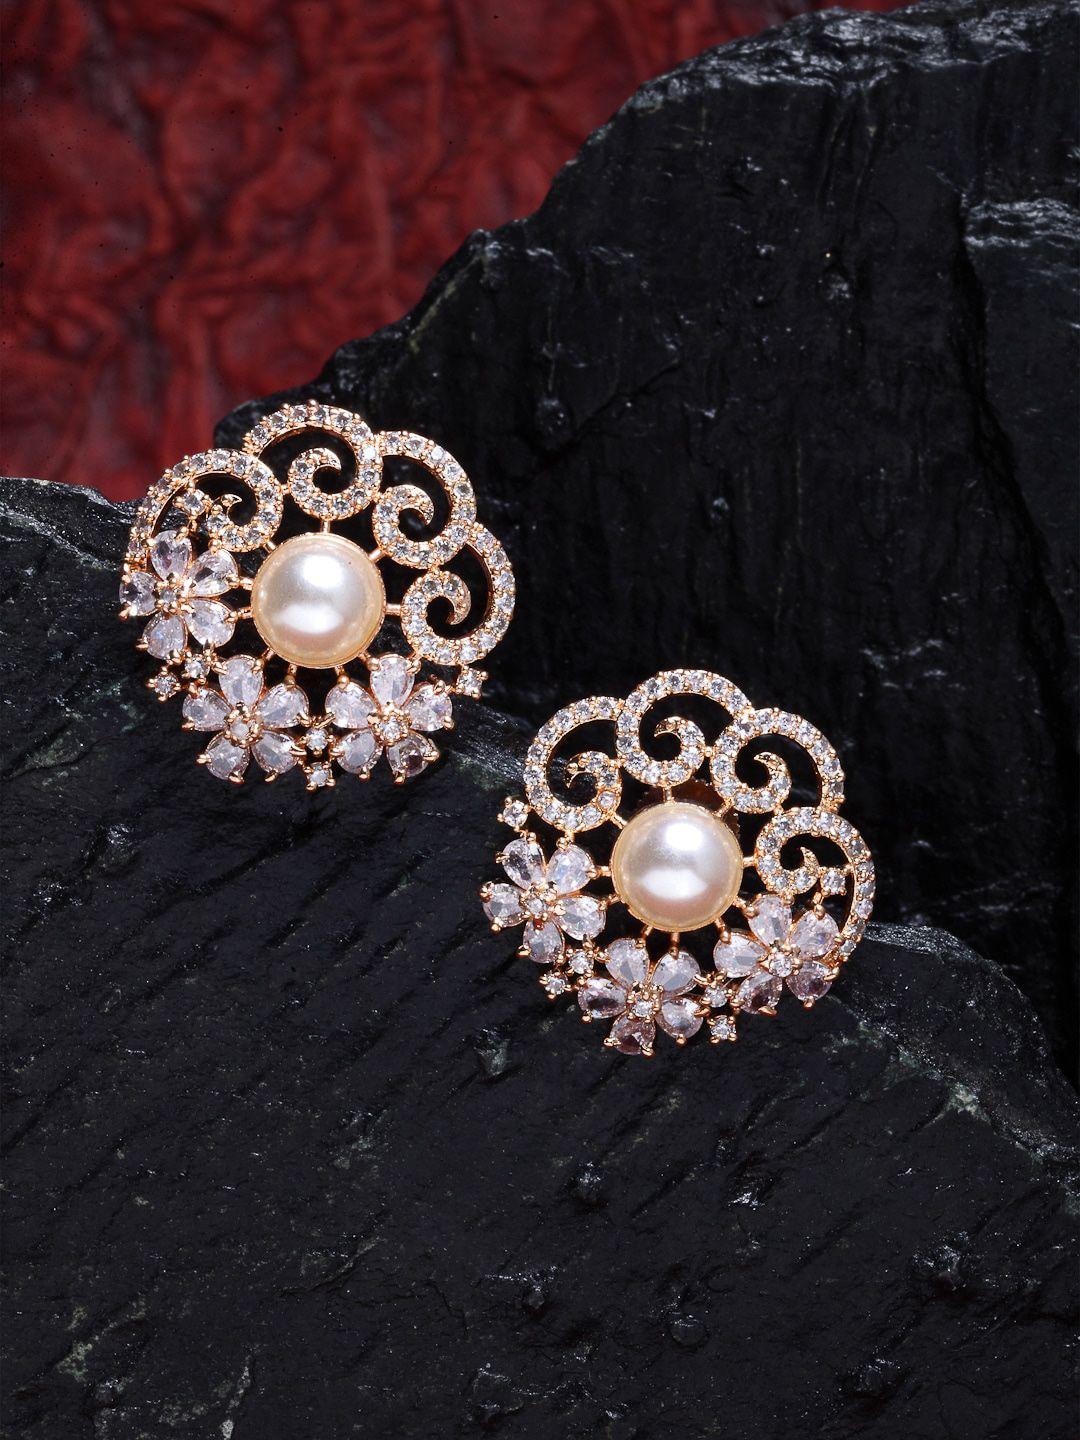 zeneme rose gold-plated & white floral studs earrings